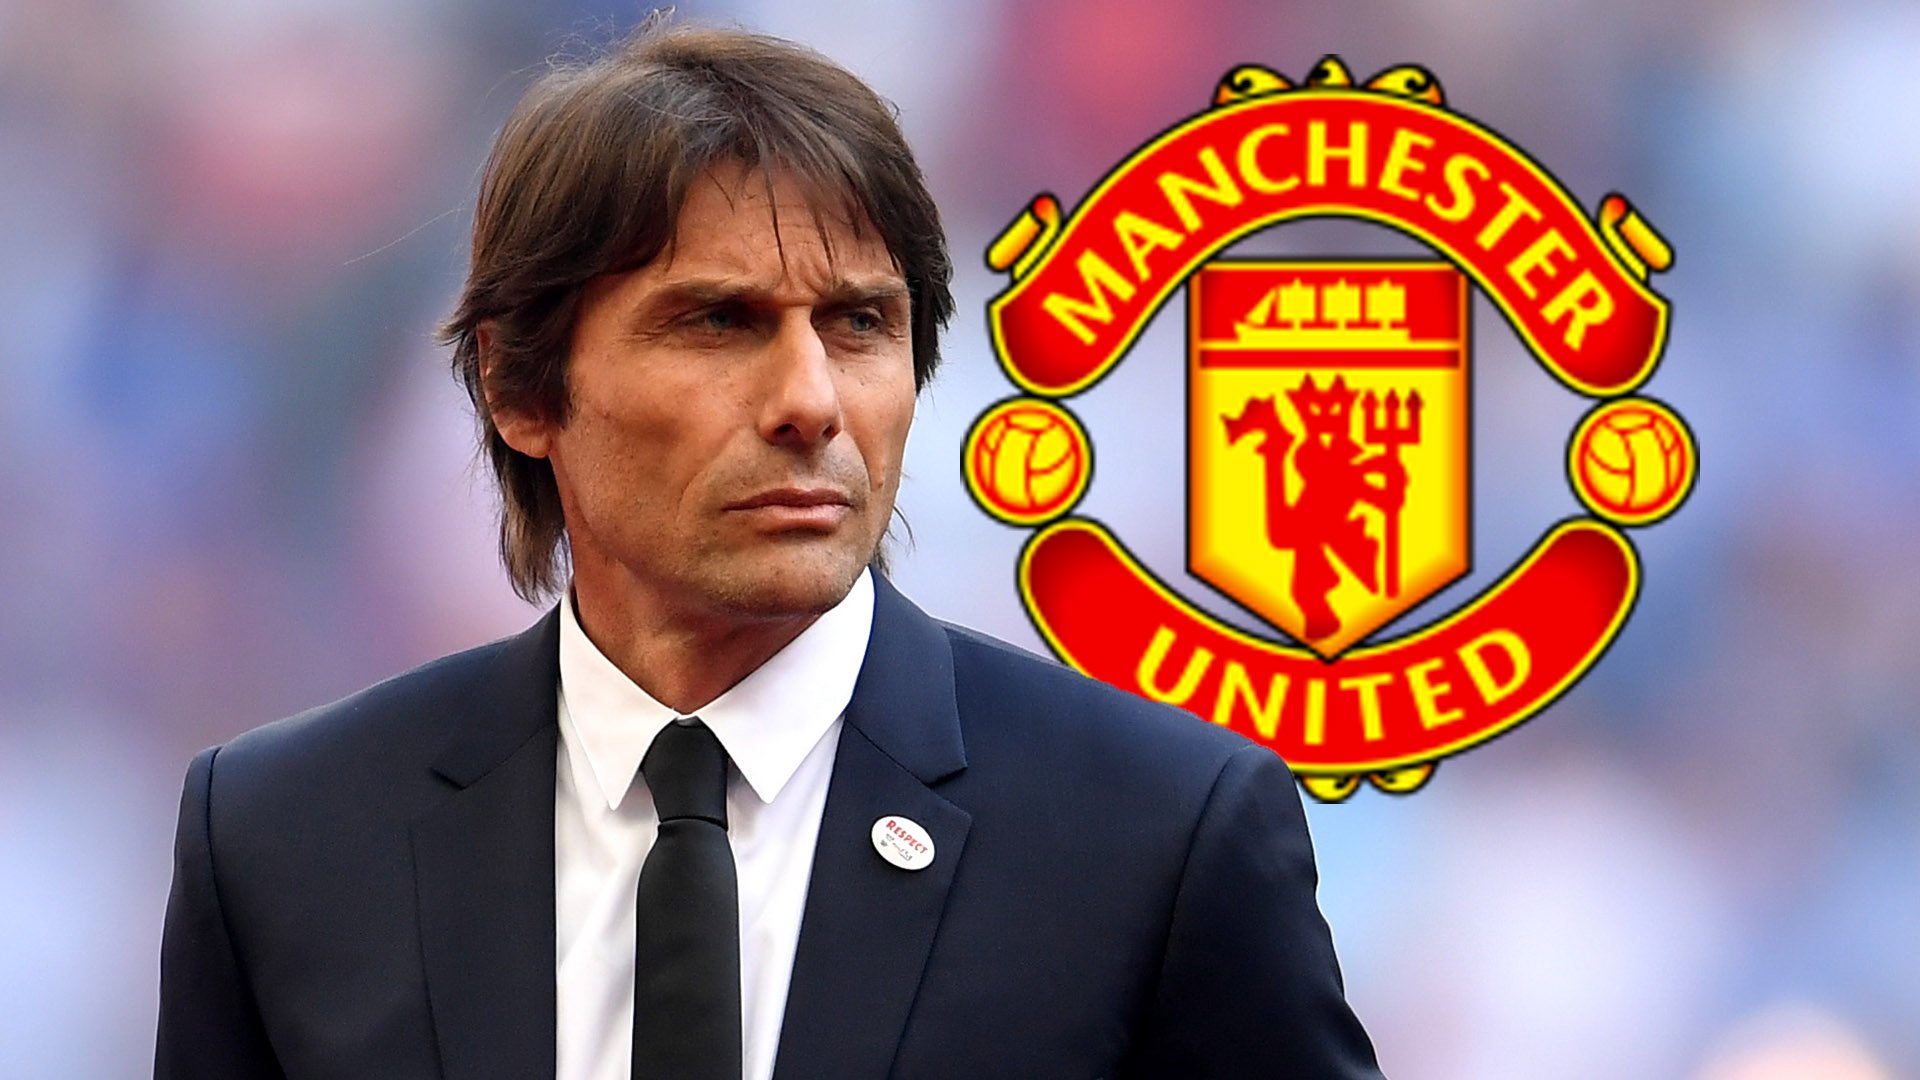 Gary Neville explains why Manchester United will not replace Ole Gunnar Solskjaer with Antonio Conte - Bóng Đá